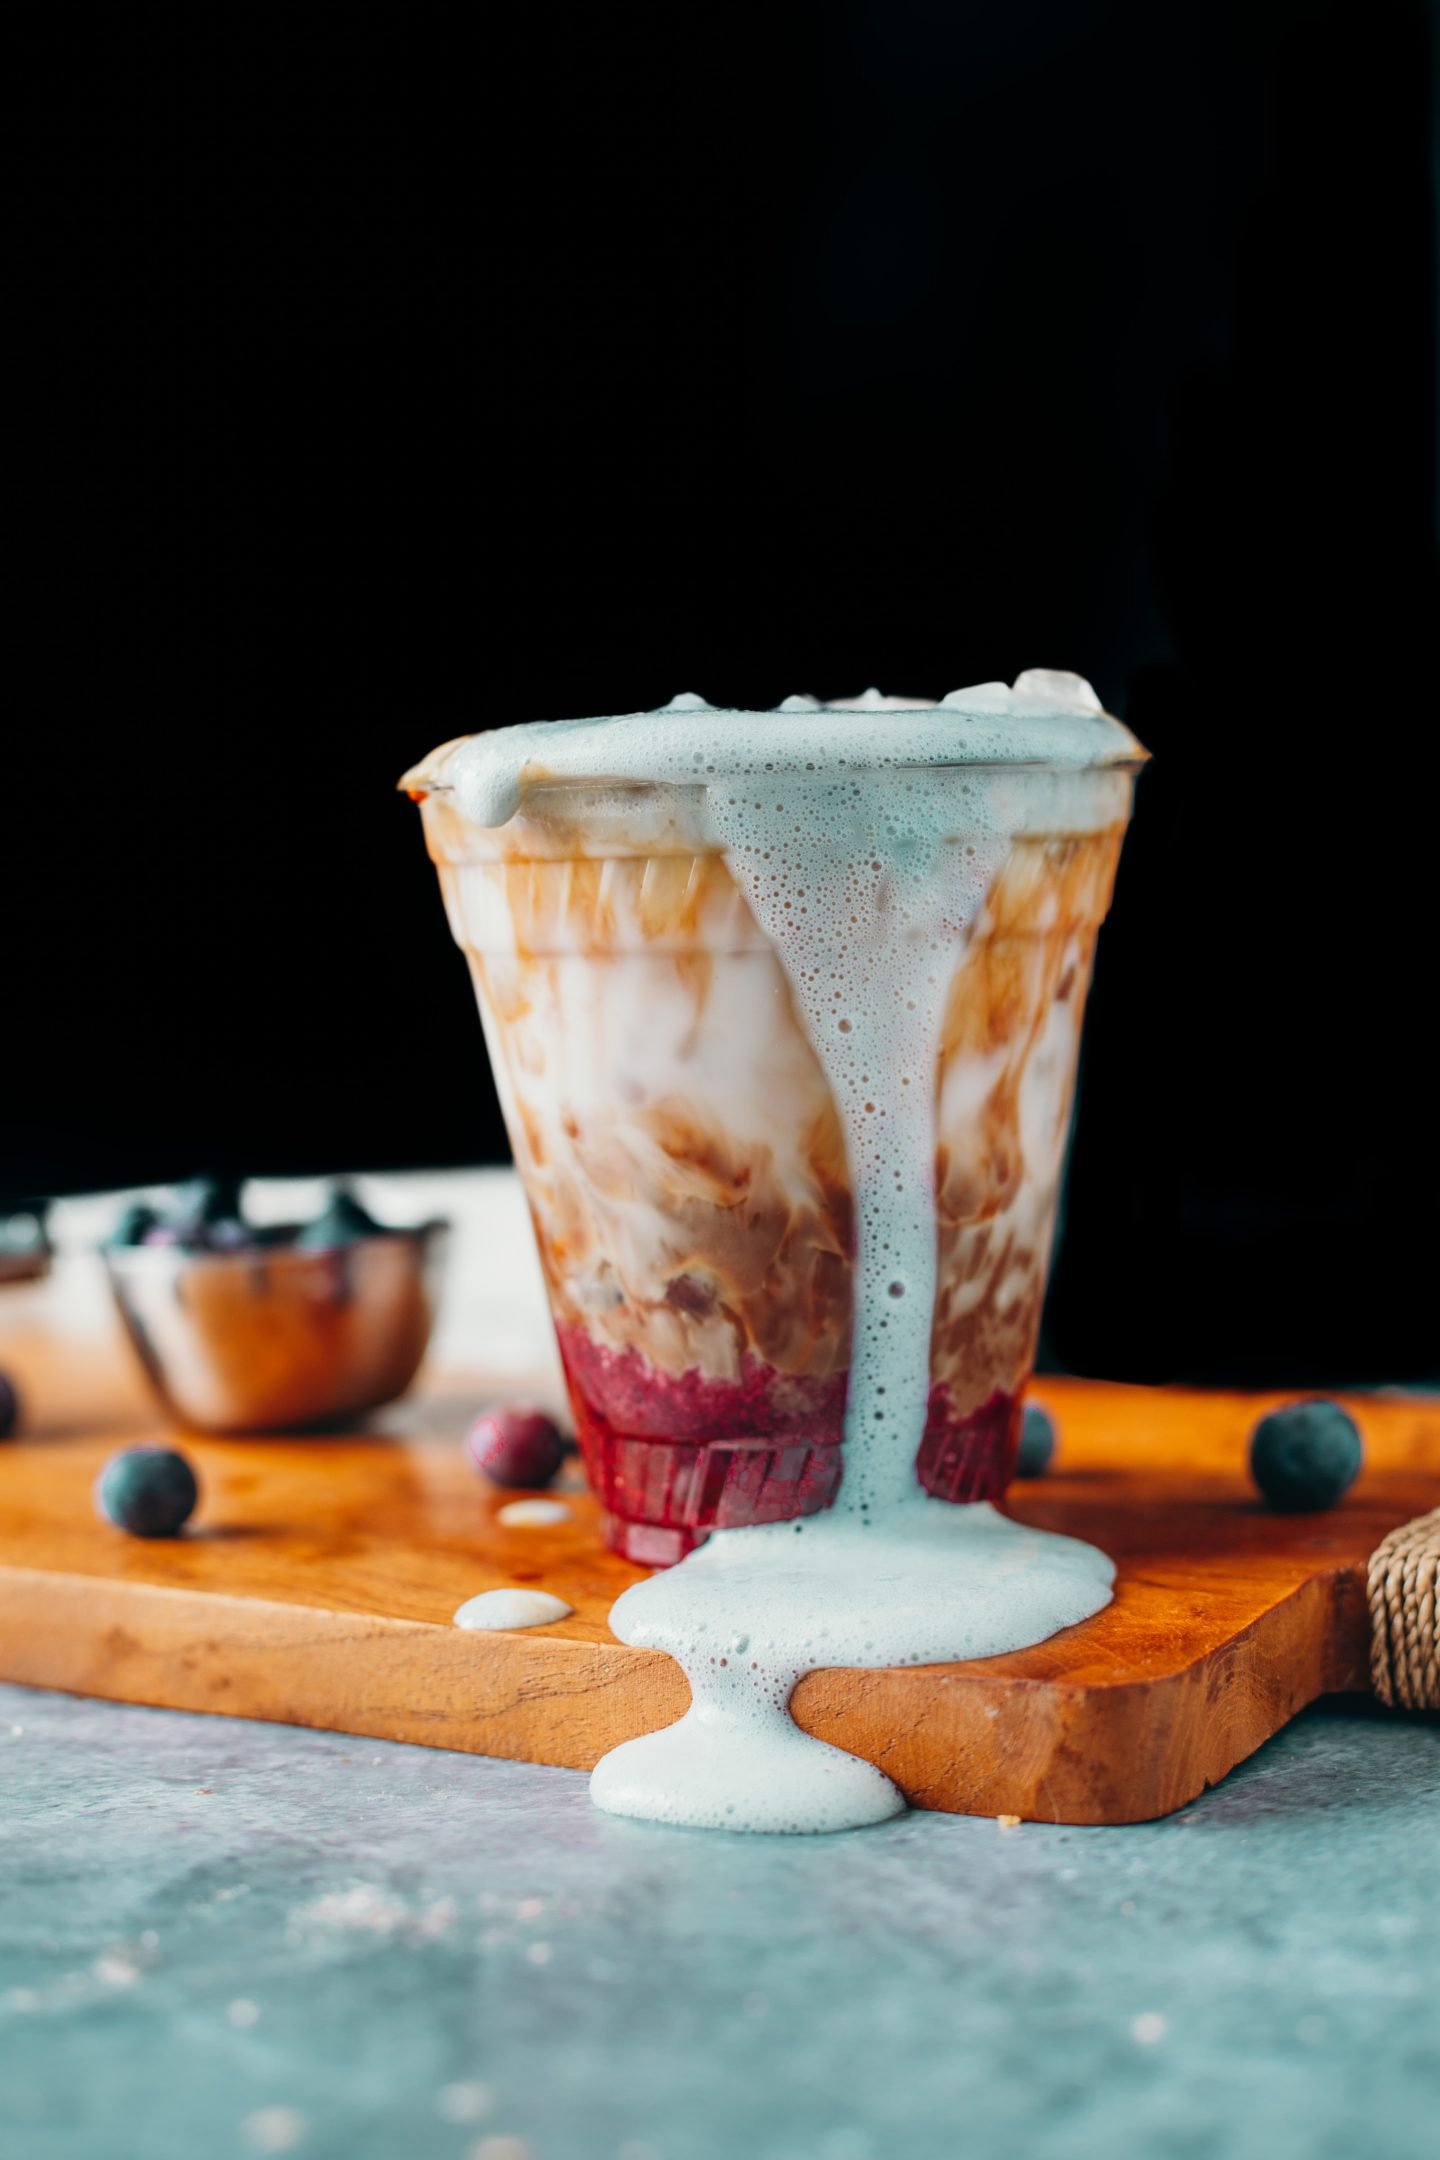 a purple collared simple syrup blueberry bottom layer, topped with a swirl of espresso and milk, ice and blue coloured cold foam dripping down the front of the plastic cup